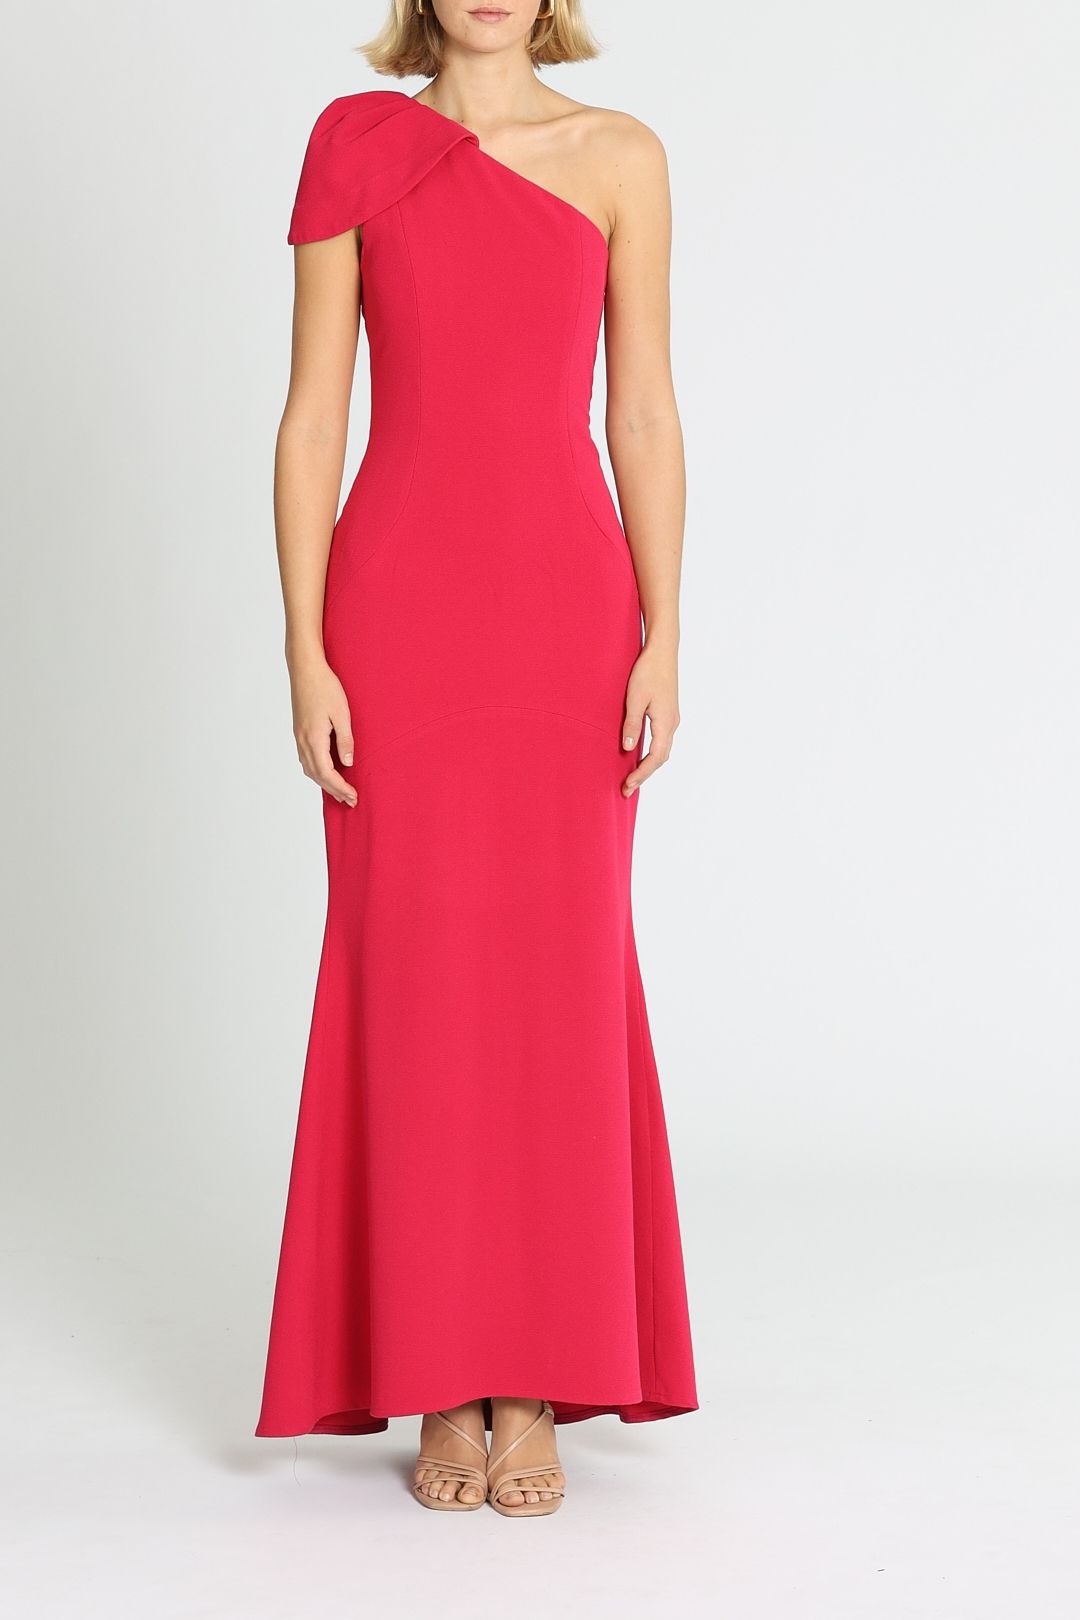 Rebecca Vallance Poppy Gown Red One Shoulder